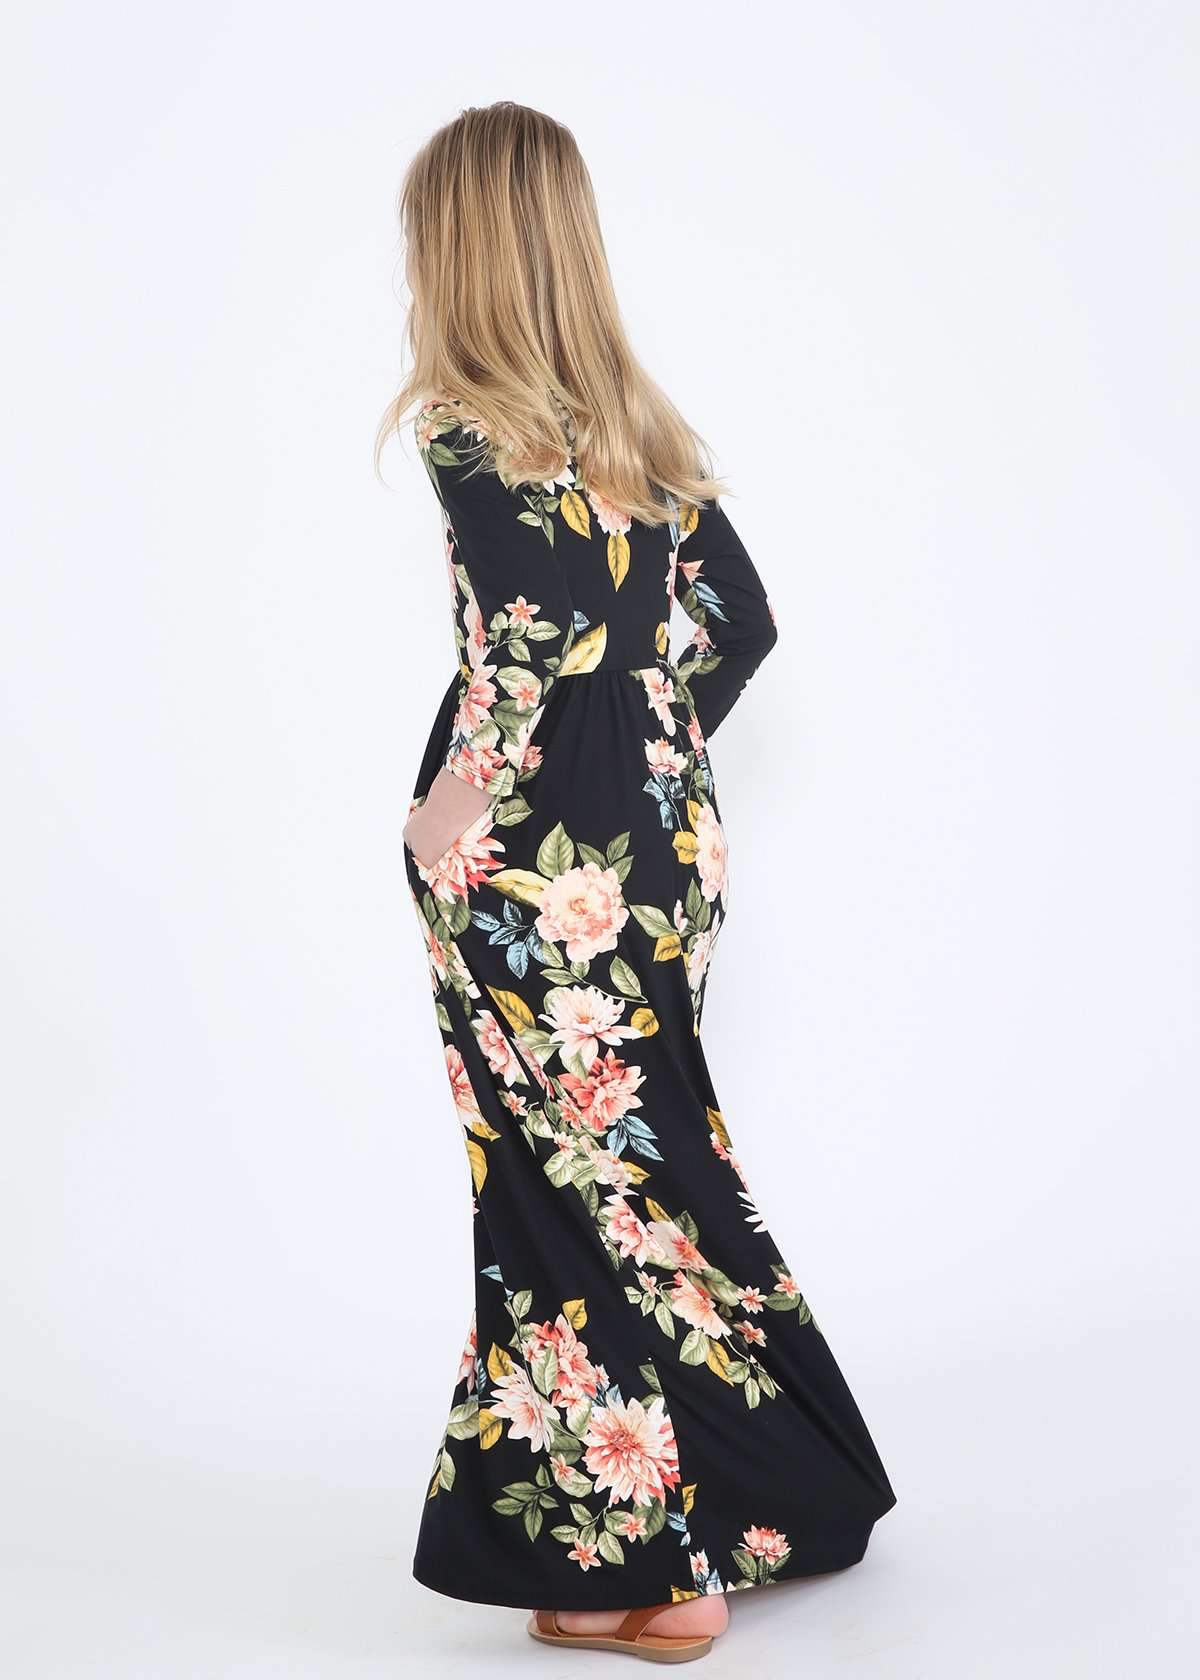 young girl wearing a modest black maxi dress with flowers on it